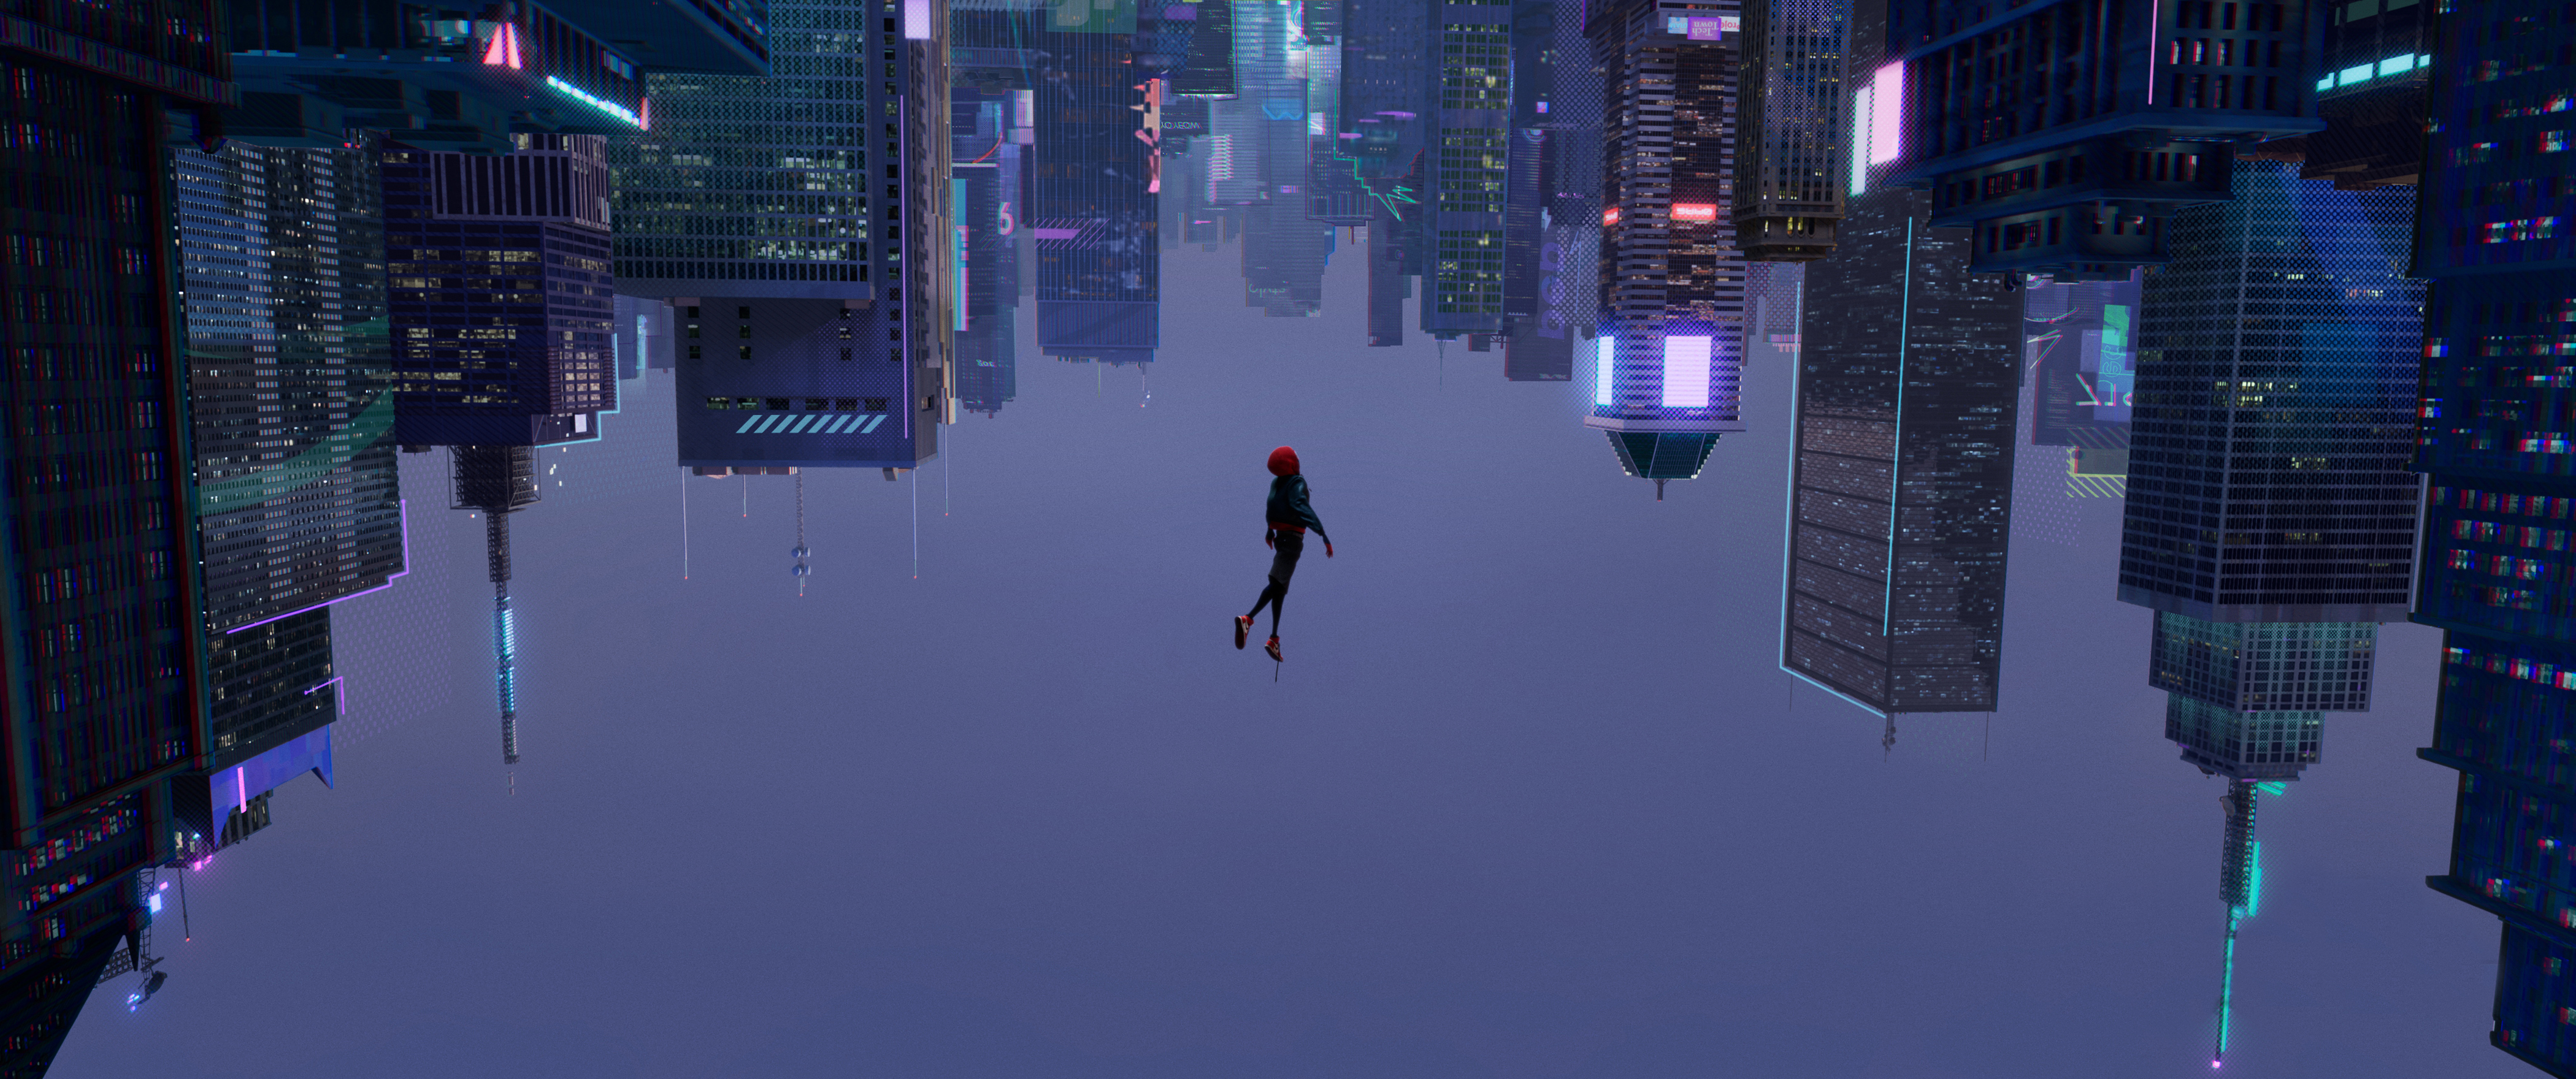 Phone Background Full HD miles morales, spider man: into the spider verse, movie